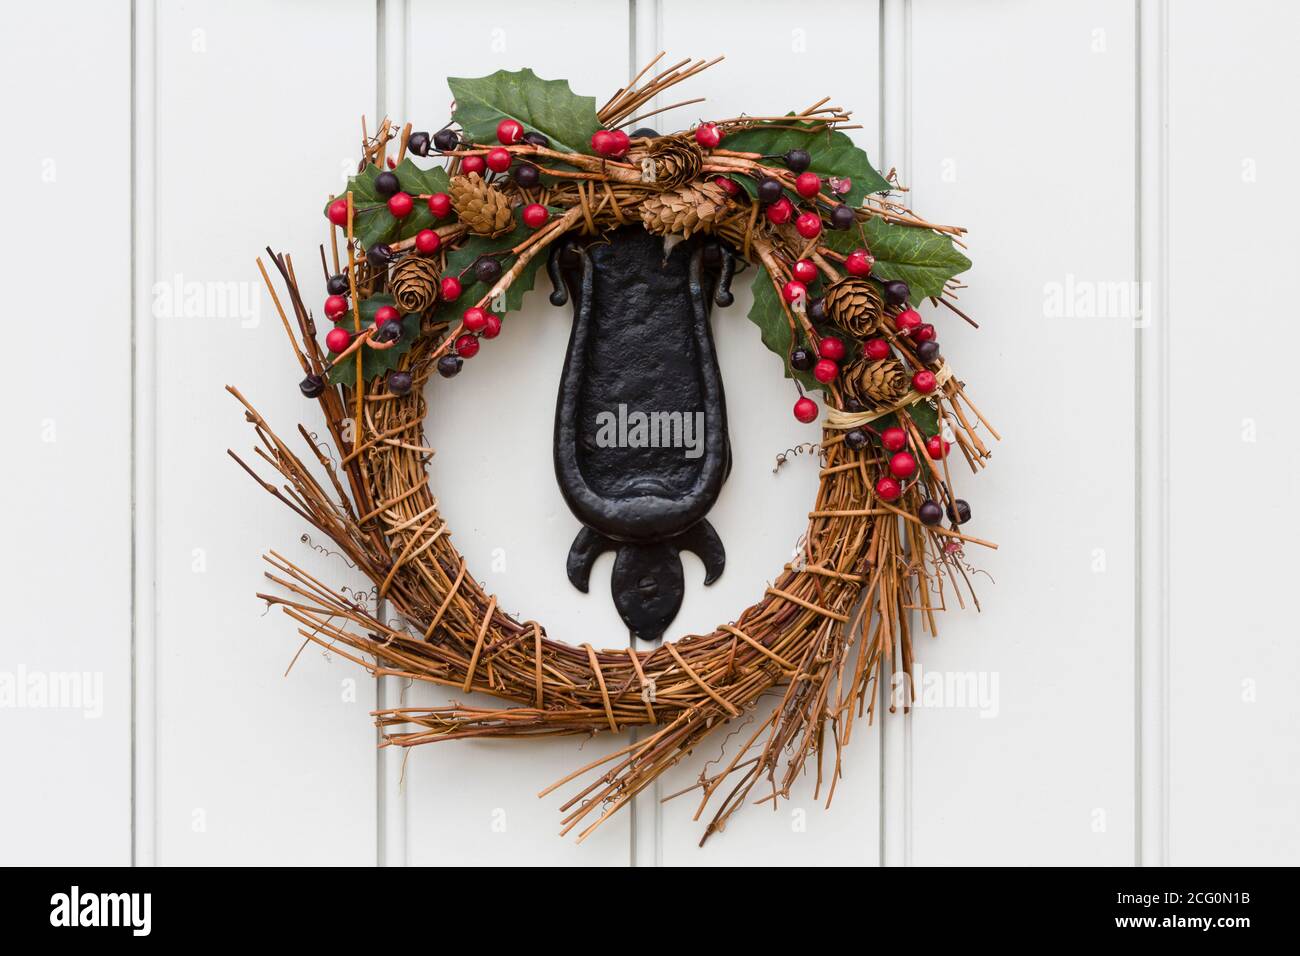 Detail of a Christmas wreath or garland on the cast iron knocker of a traditional painted wooden door Stock Photo